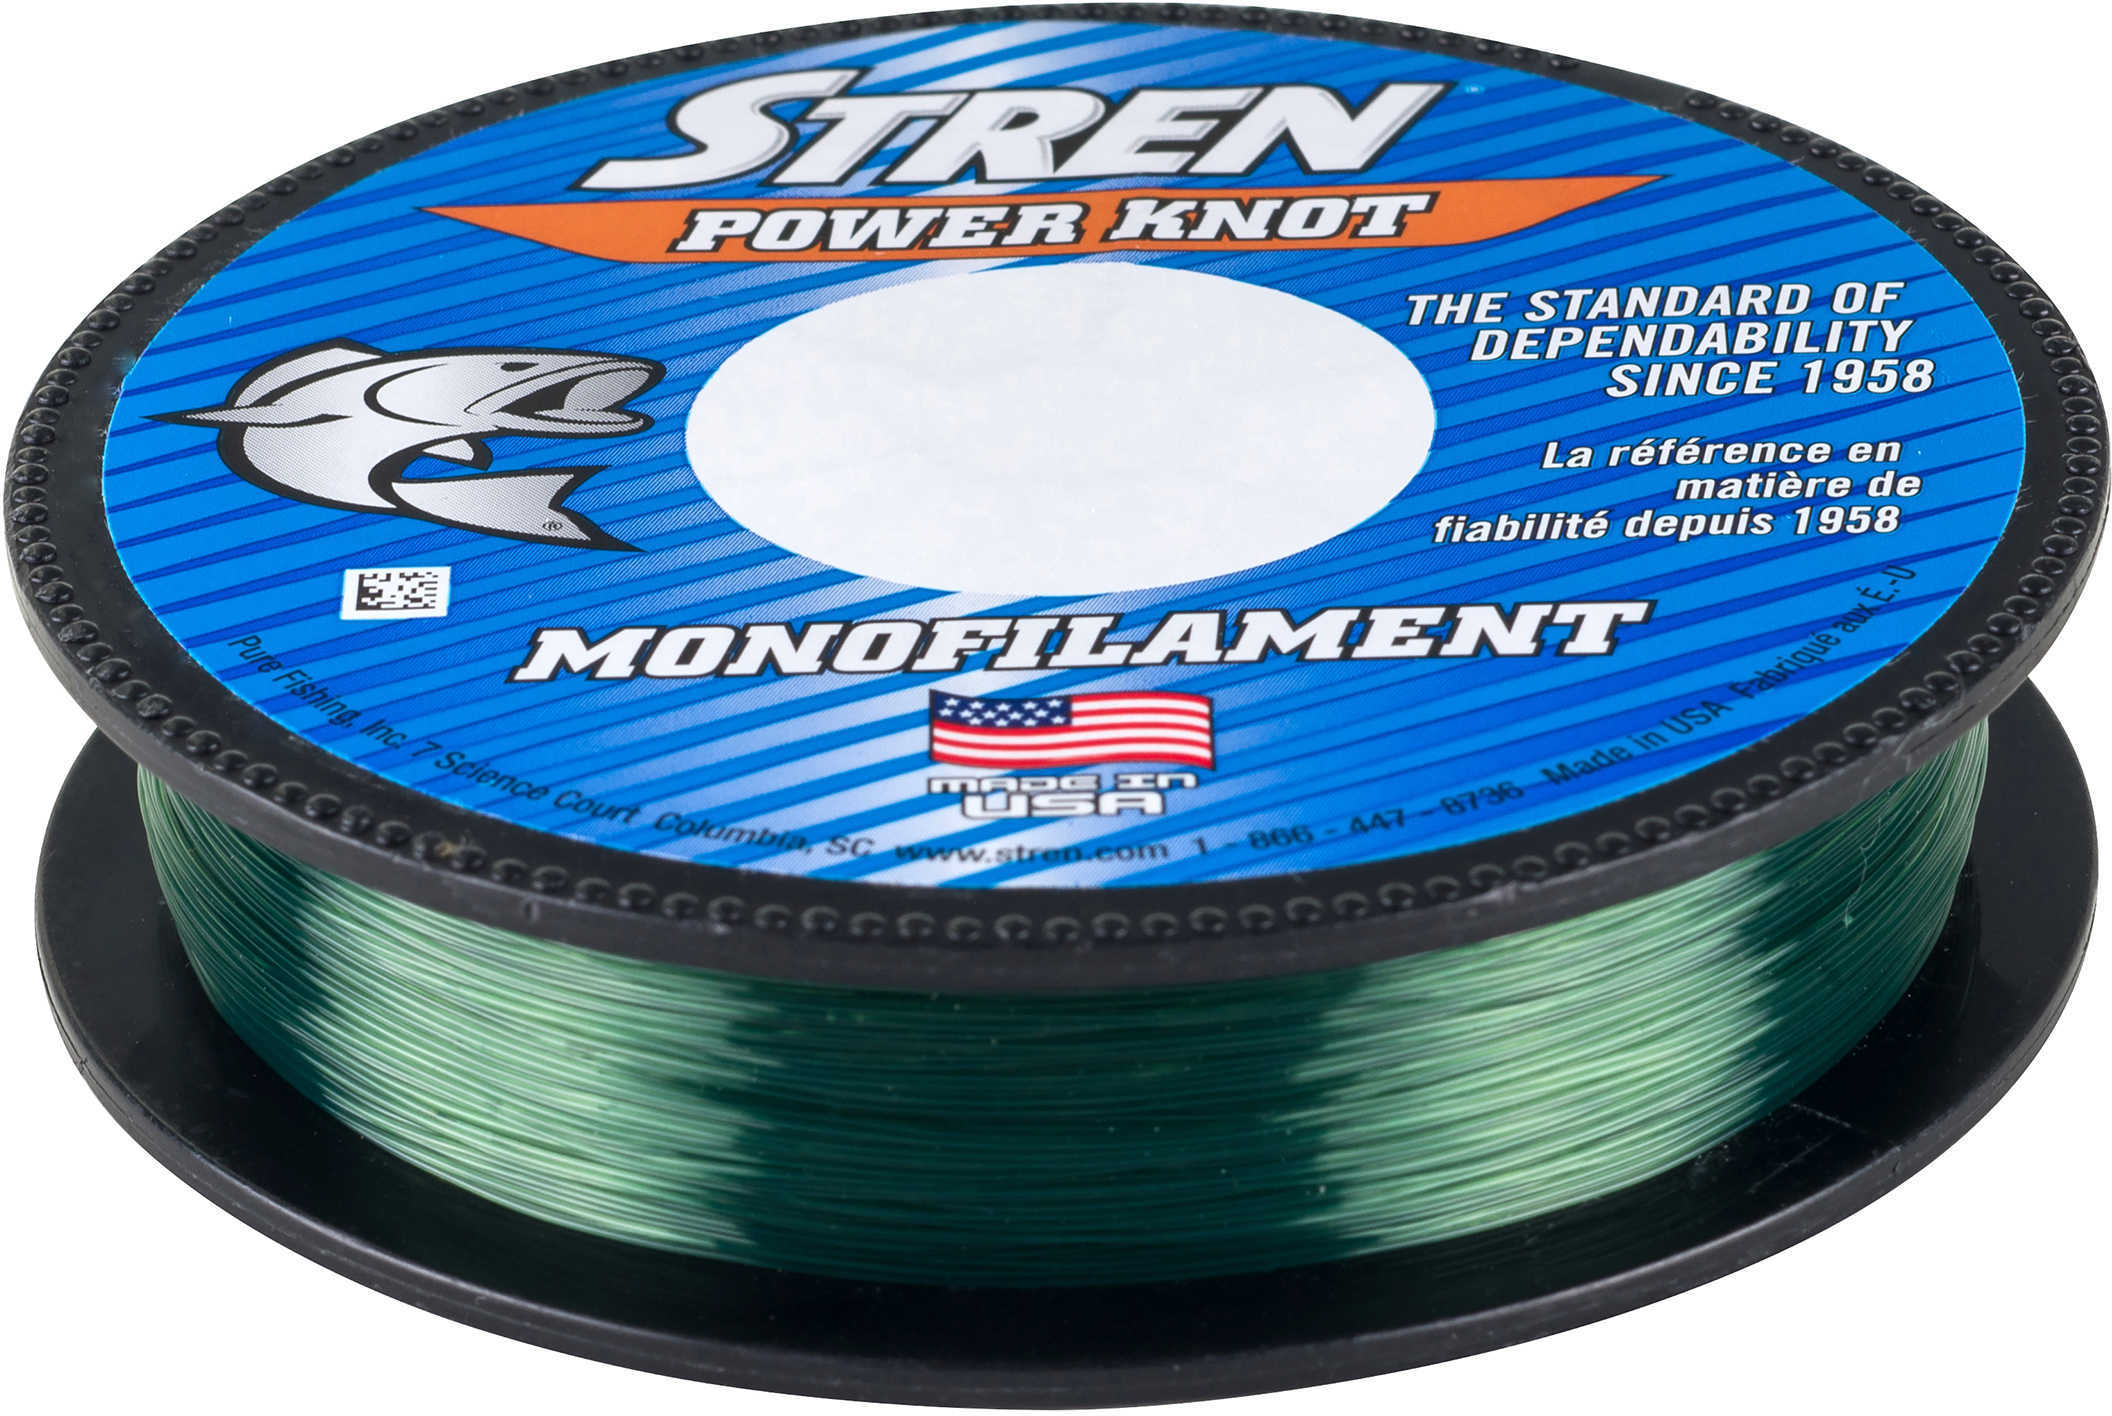 Power Knot 220 Yards , 8 lbs Strength, 0.012", Lo-Vis Green Md: 1367560